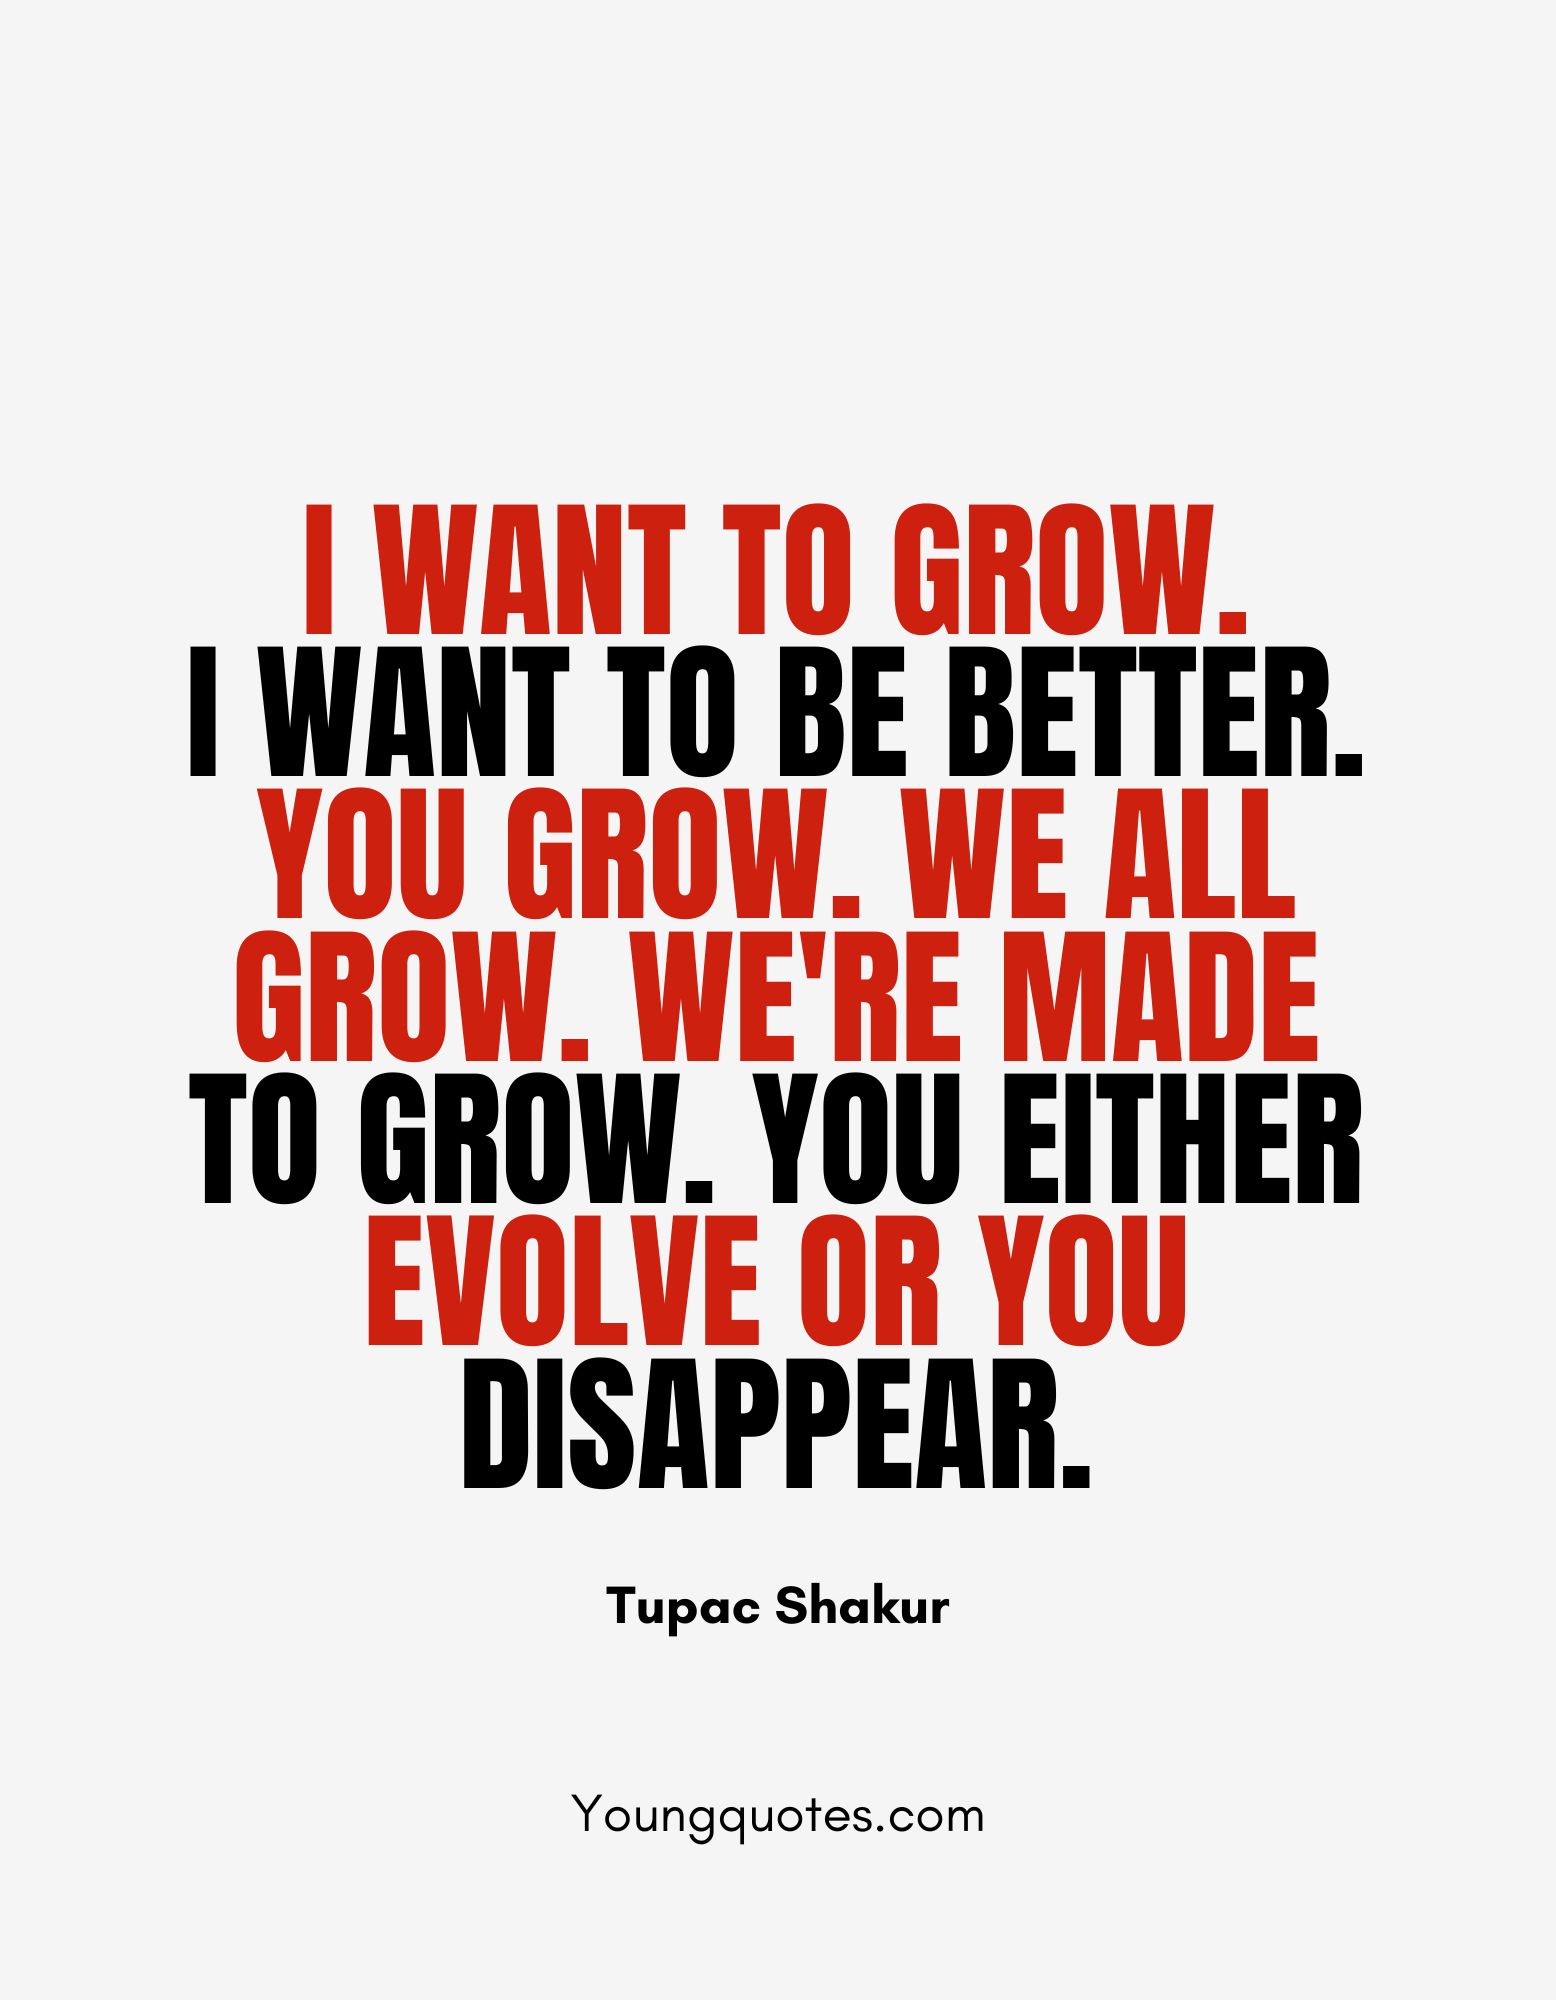 I want to grow. I want to be better. You Grow. We all grow. We're made to grow. You either evolve or you disappear.